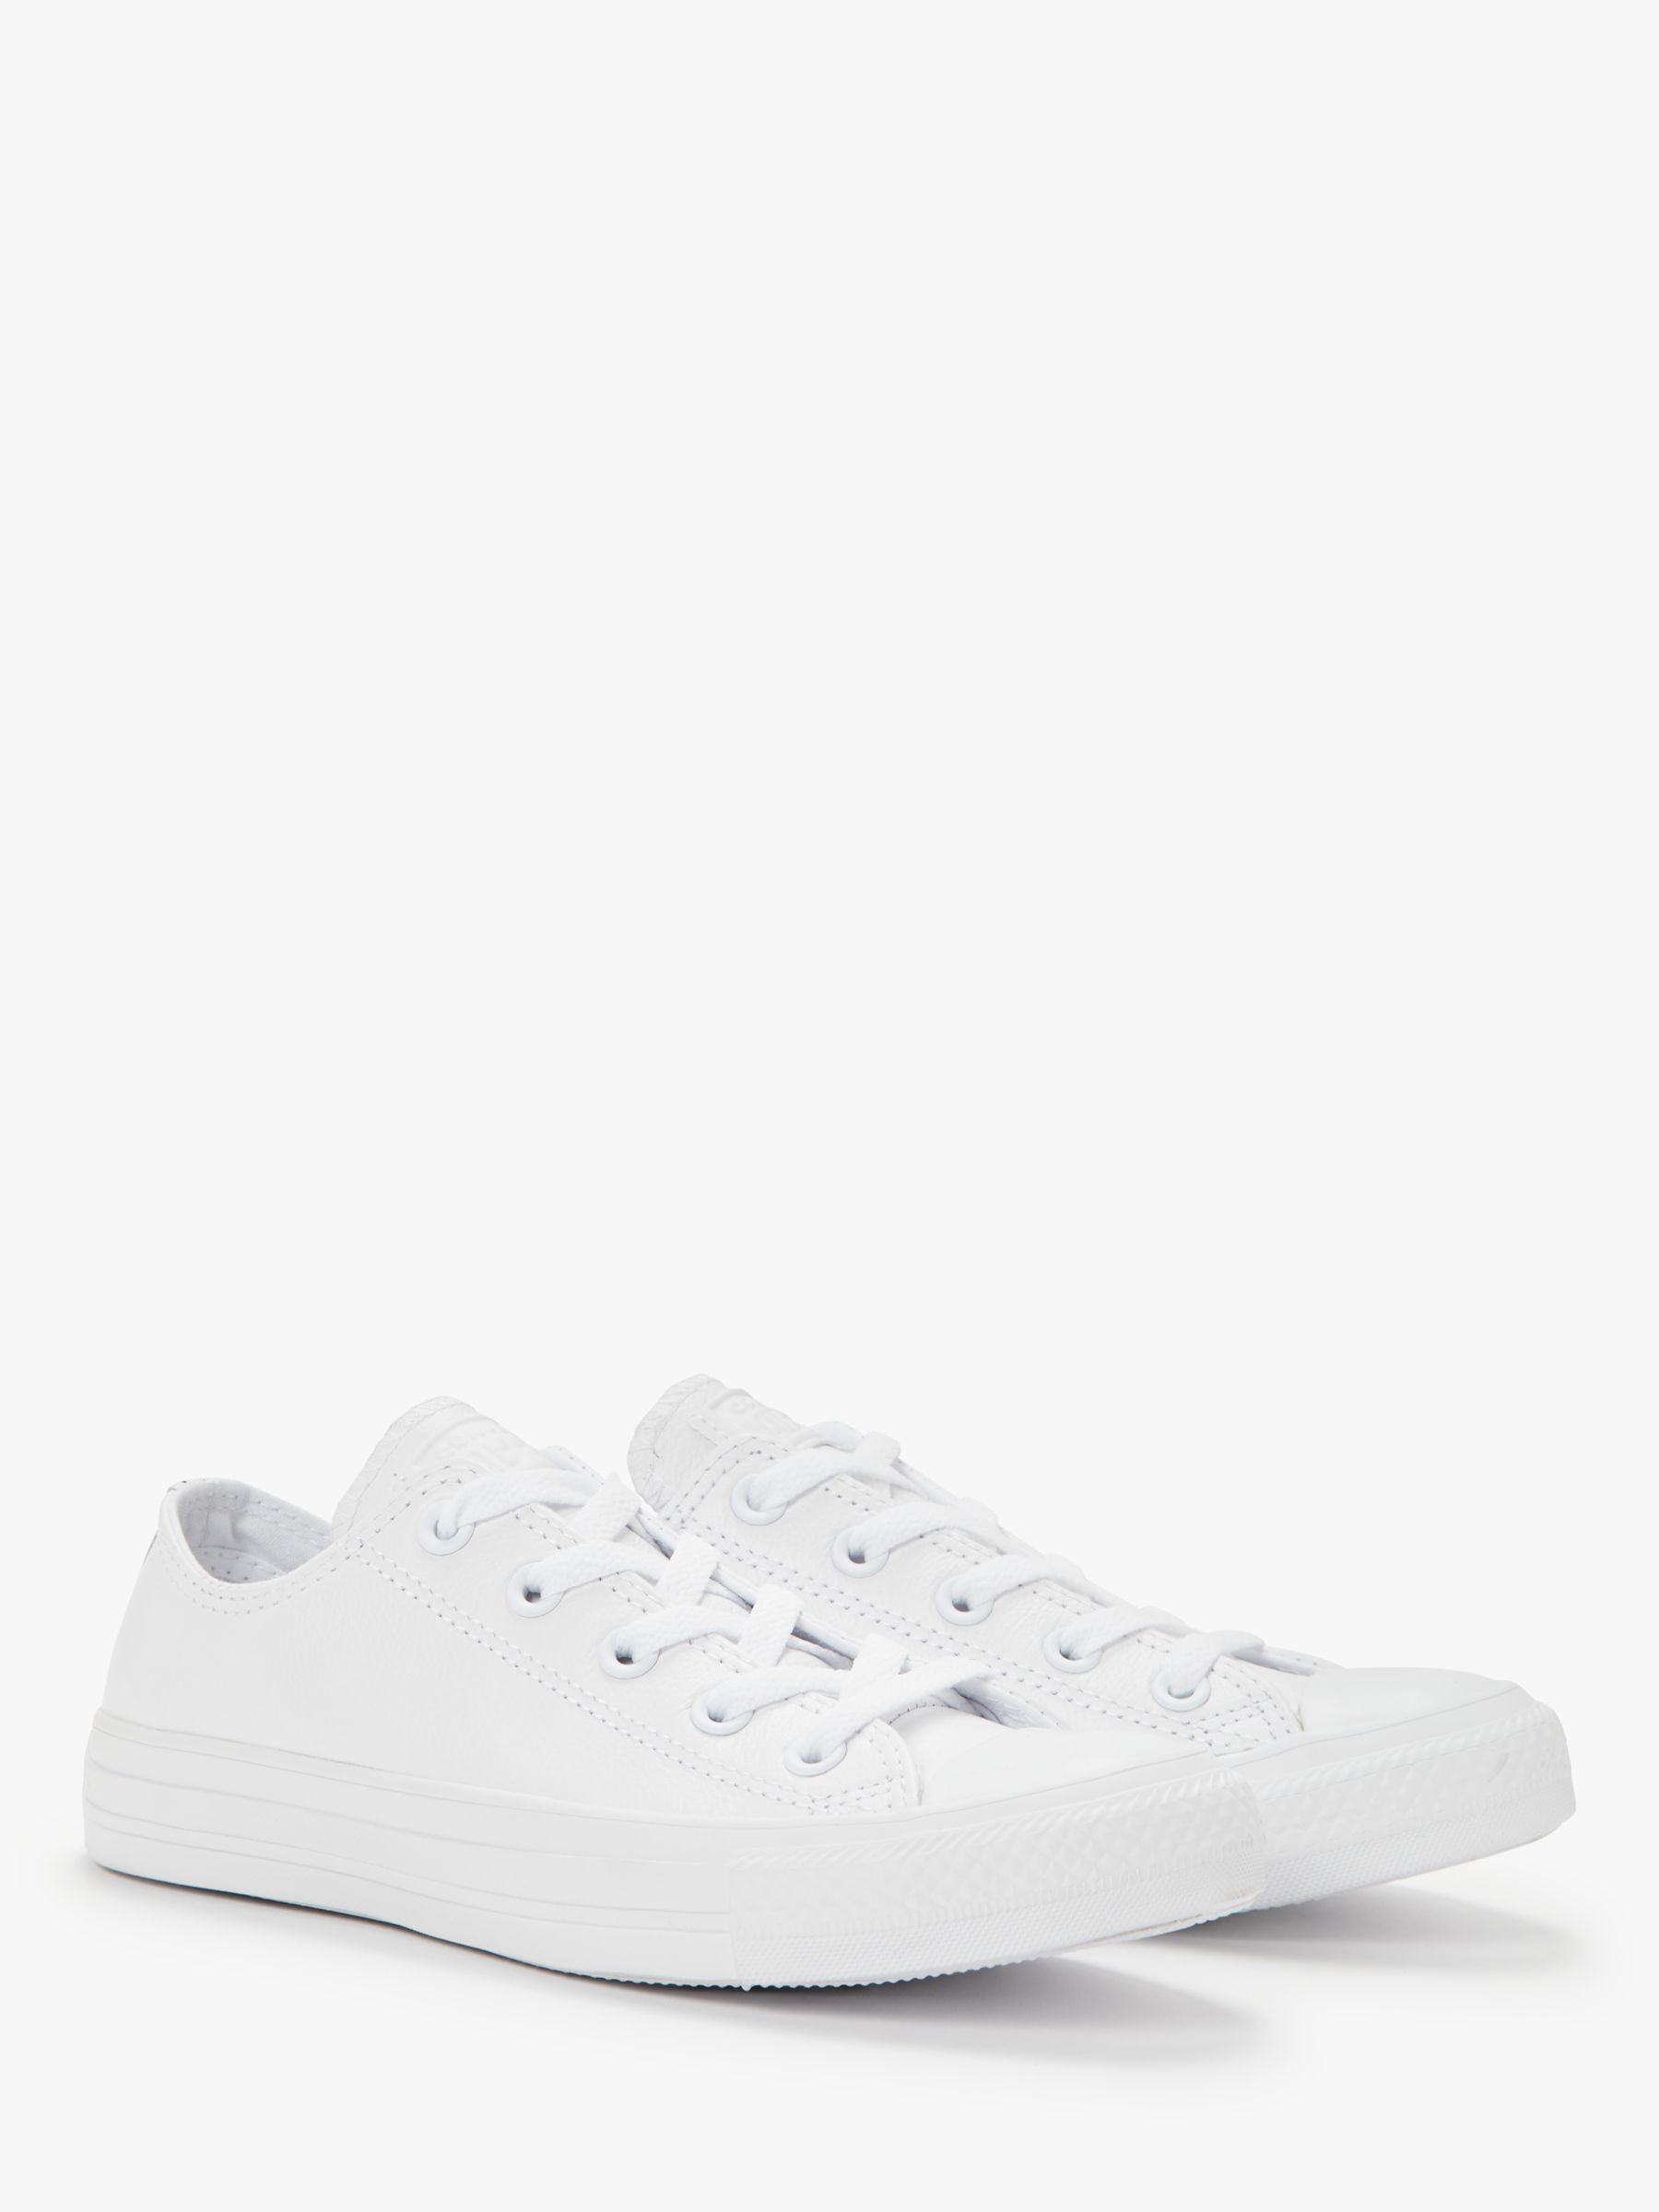 Converse Chuck Taylor All Star Women's Ox Leather Trainers, White at ...